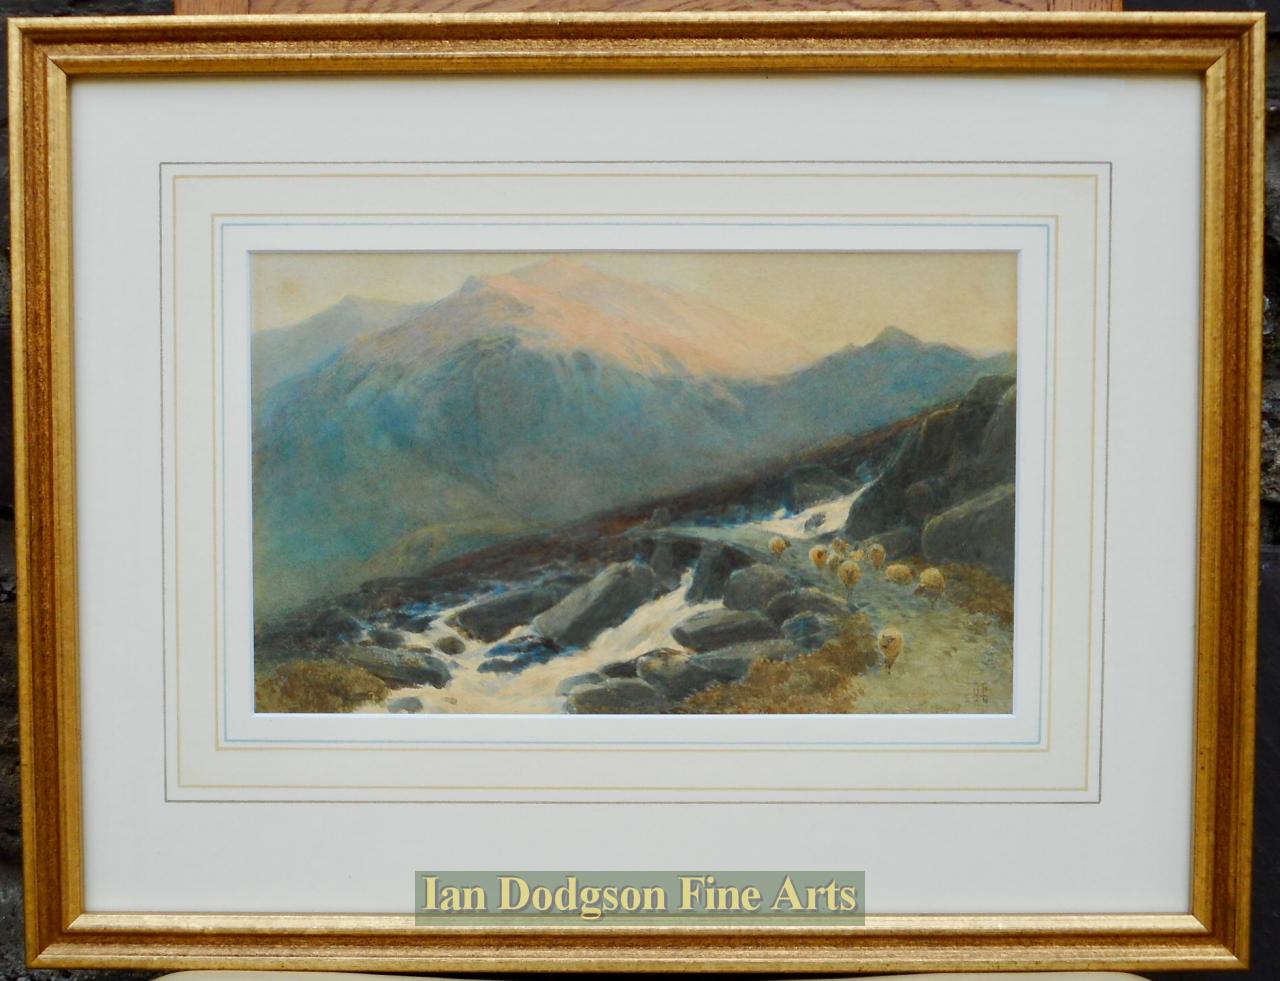 Snowdonia, The Slabs and Devils Kitchen by James Jackson Curnock ARCA, RA.